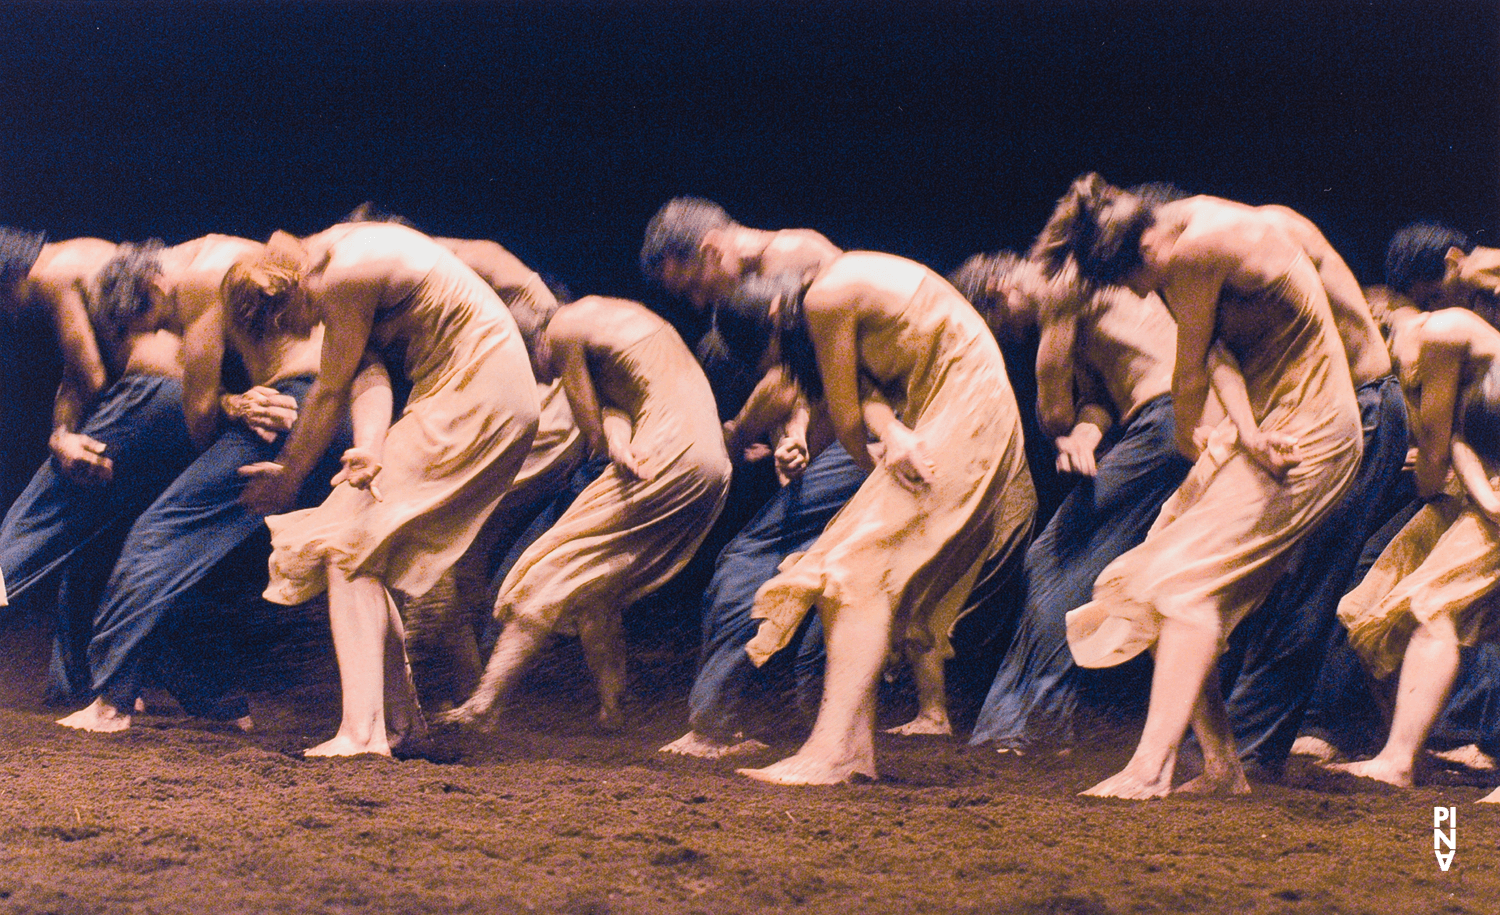 “The Rite of Spring” by Pina Bausch, season 2007/08